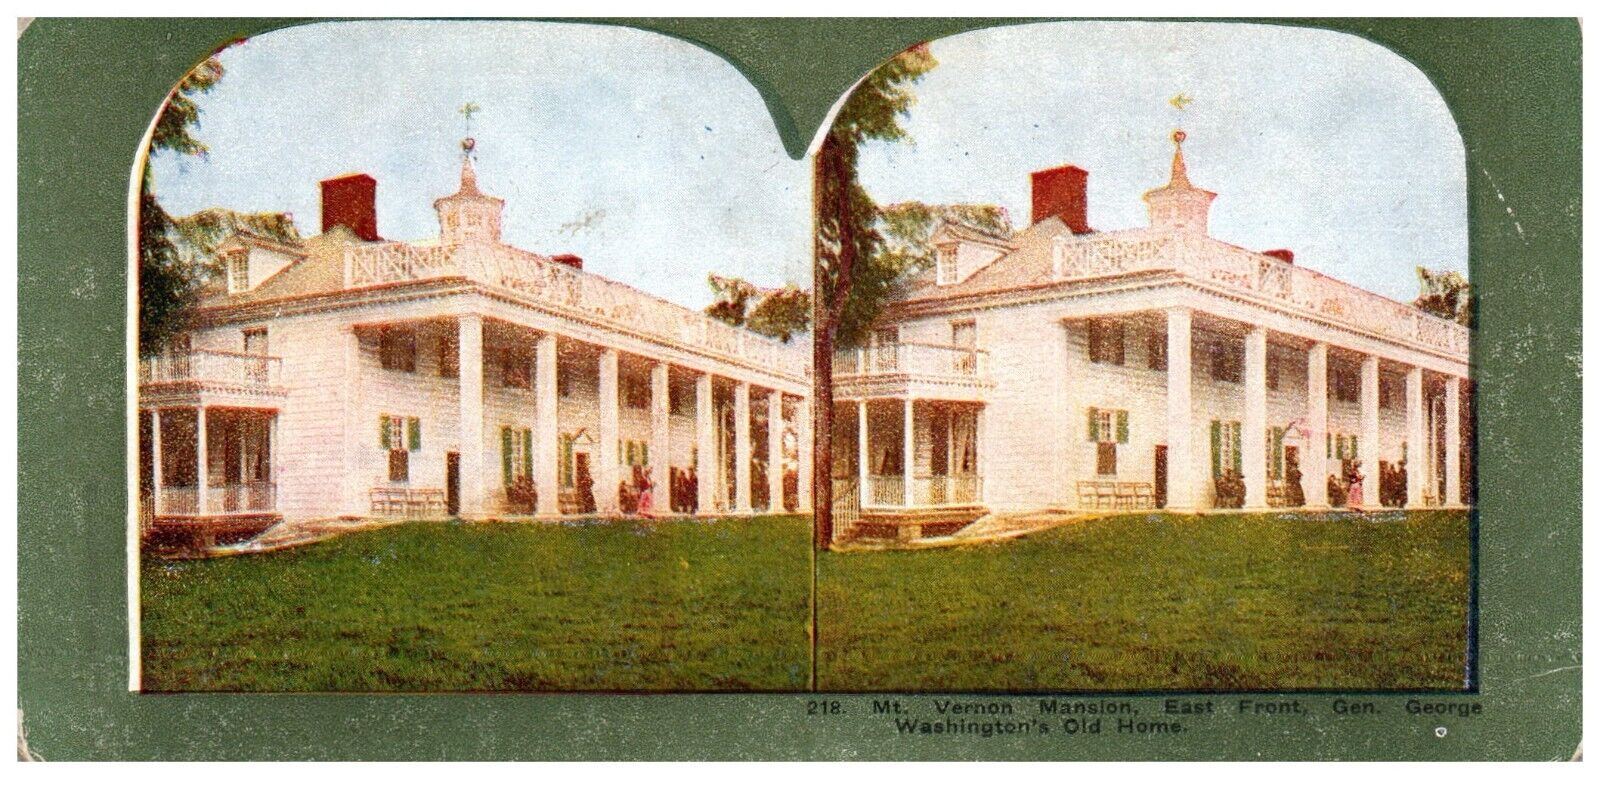 STEREOSCOPE MT VERNON MANSION  GENERAL GEORGE WASHINGTONS HOME  CARD 218